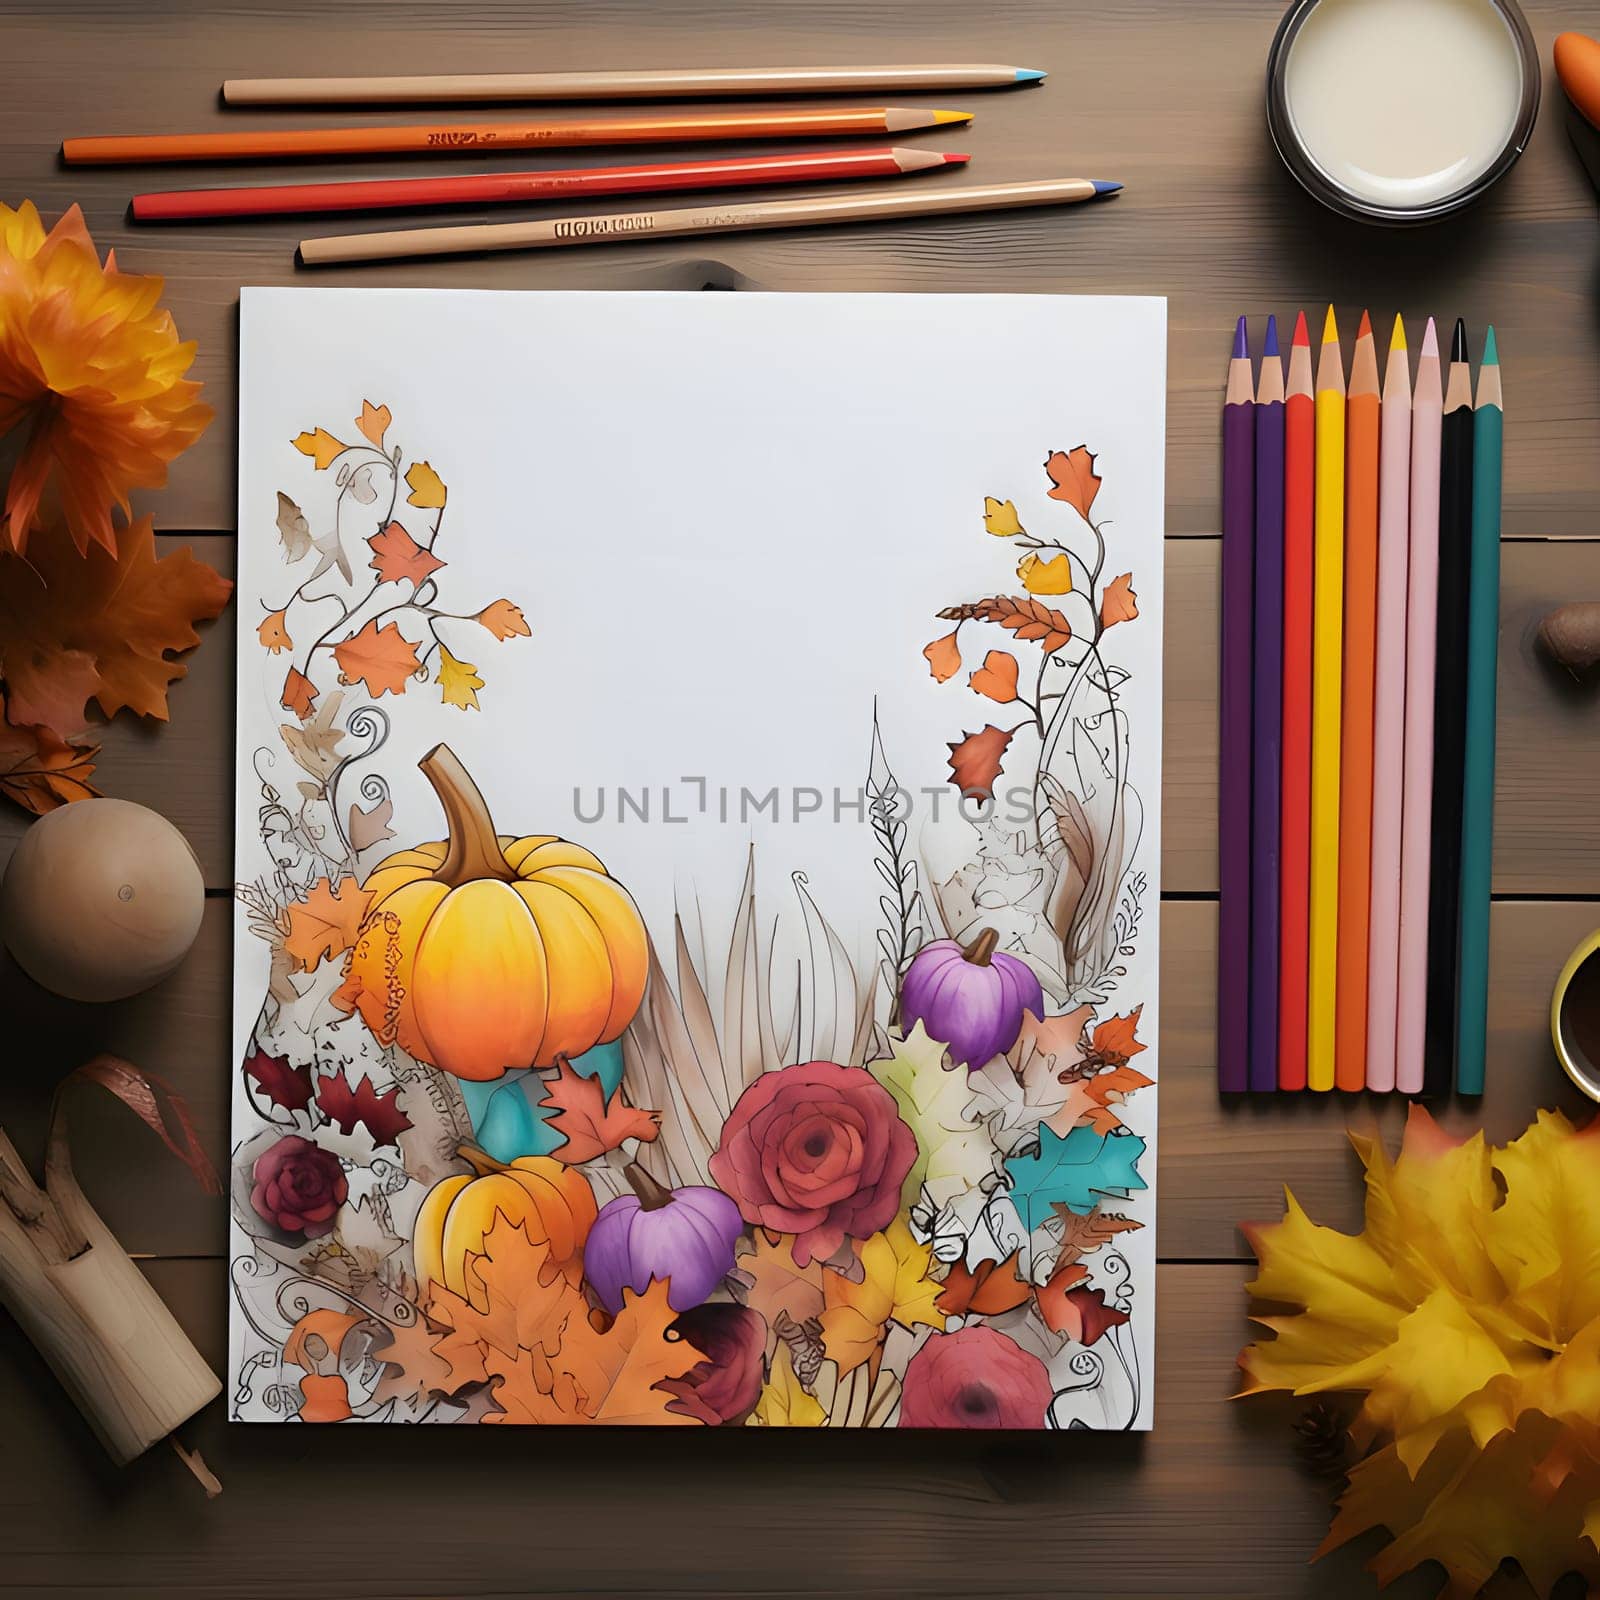 Wooden desk and on it colored pencils and a drawing of pumpkin flowers leaves harvest from the field on a white sheet. Pumpkin as a dish of thanksgiving for the harvest. by ThemesS